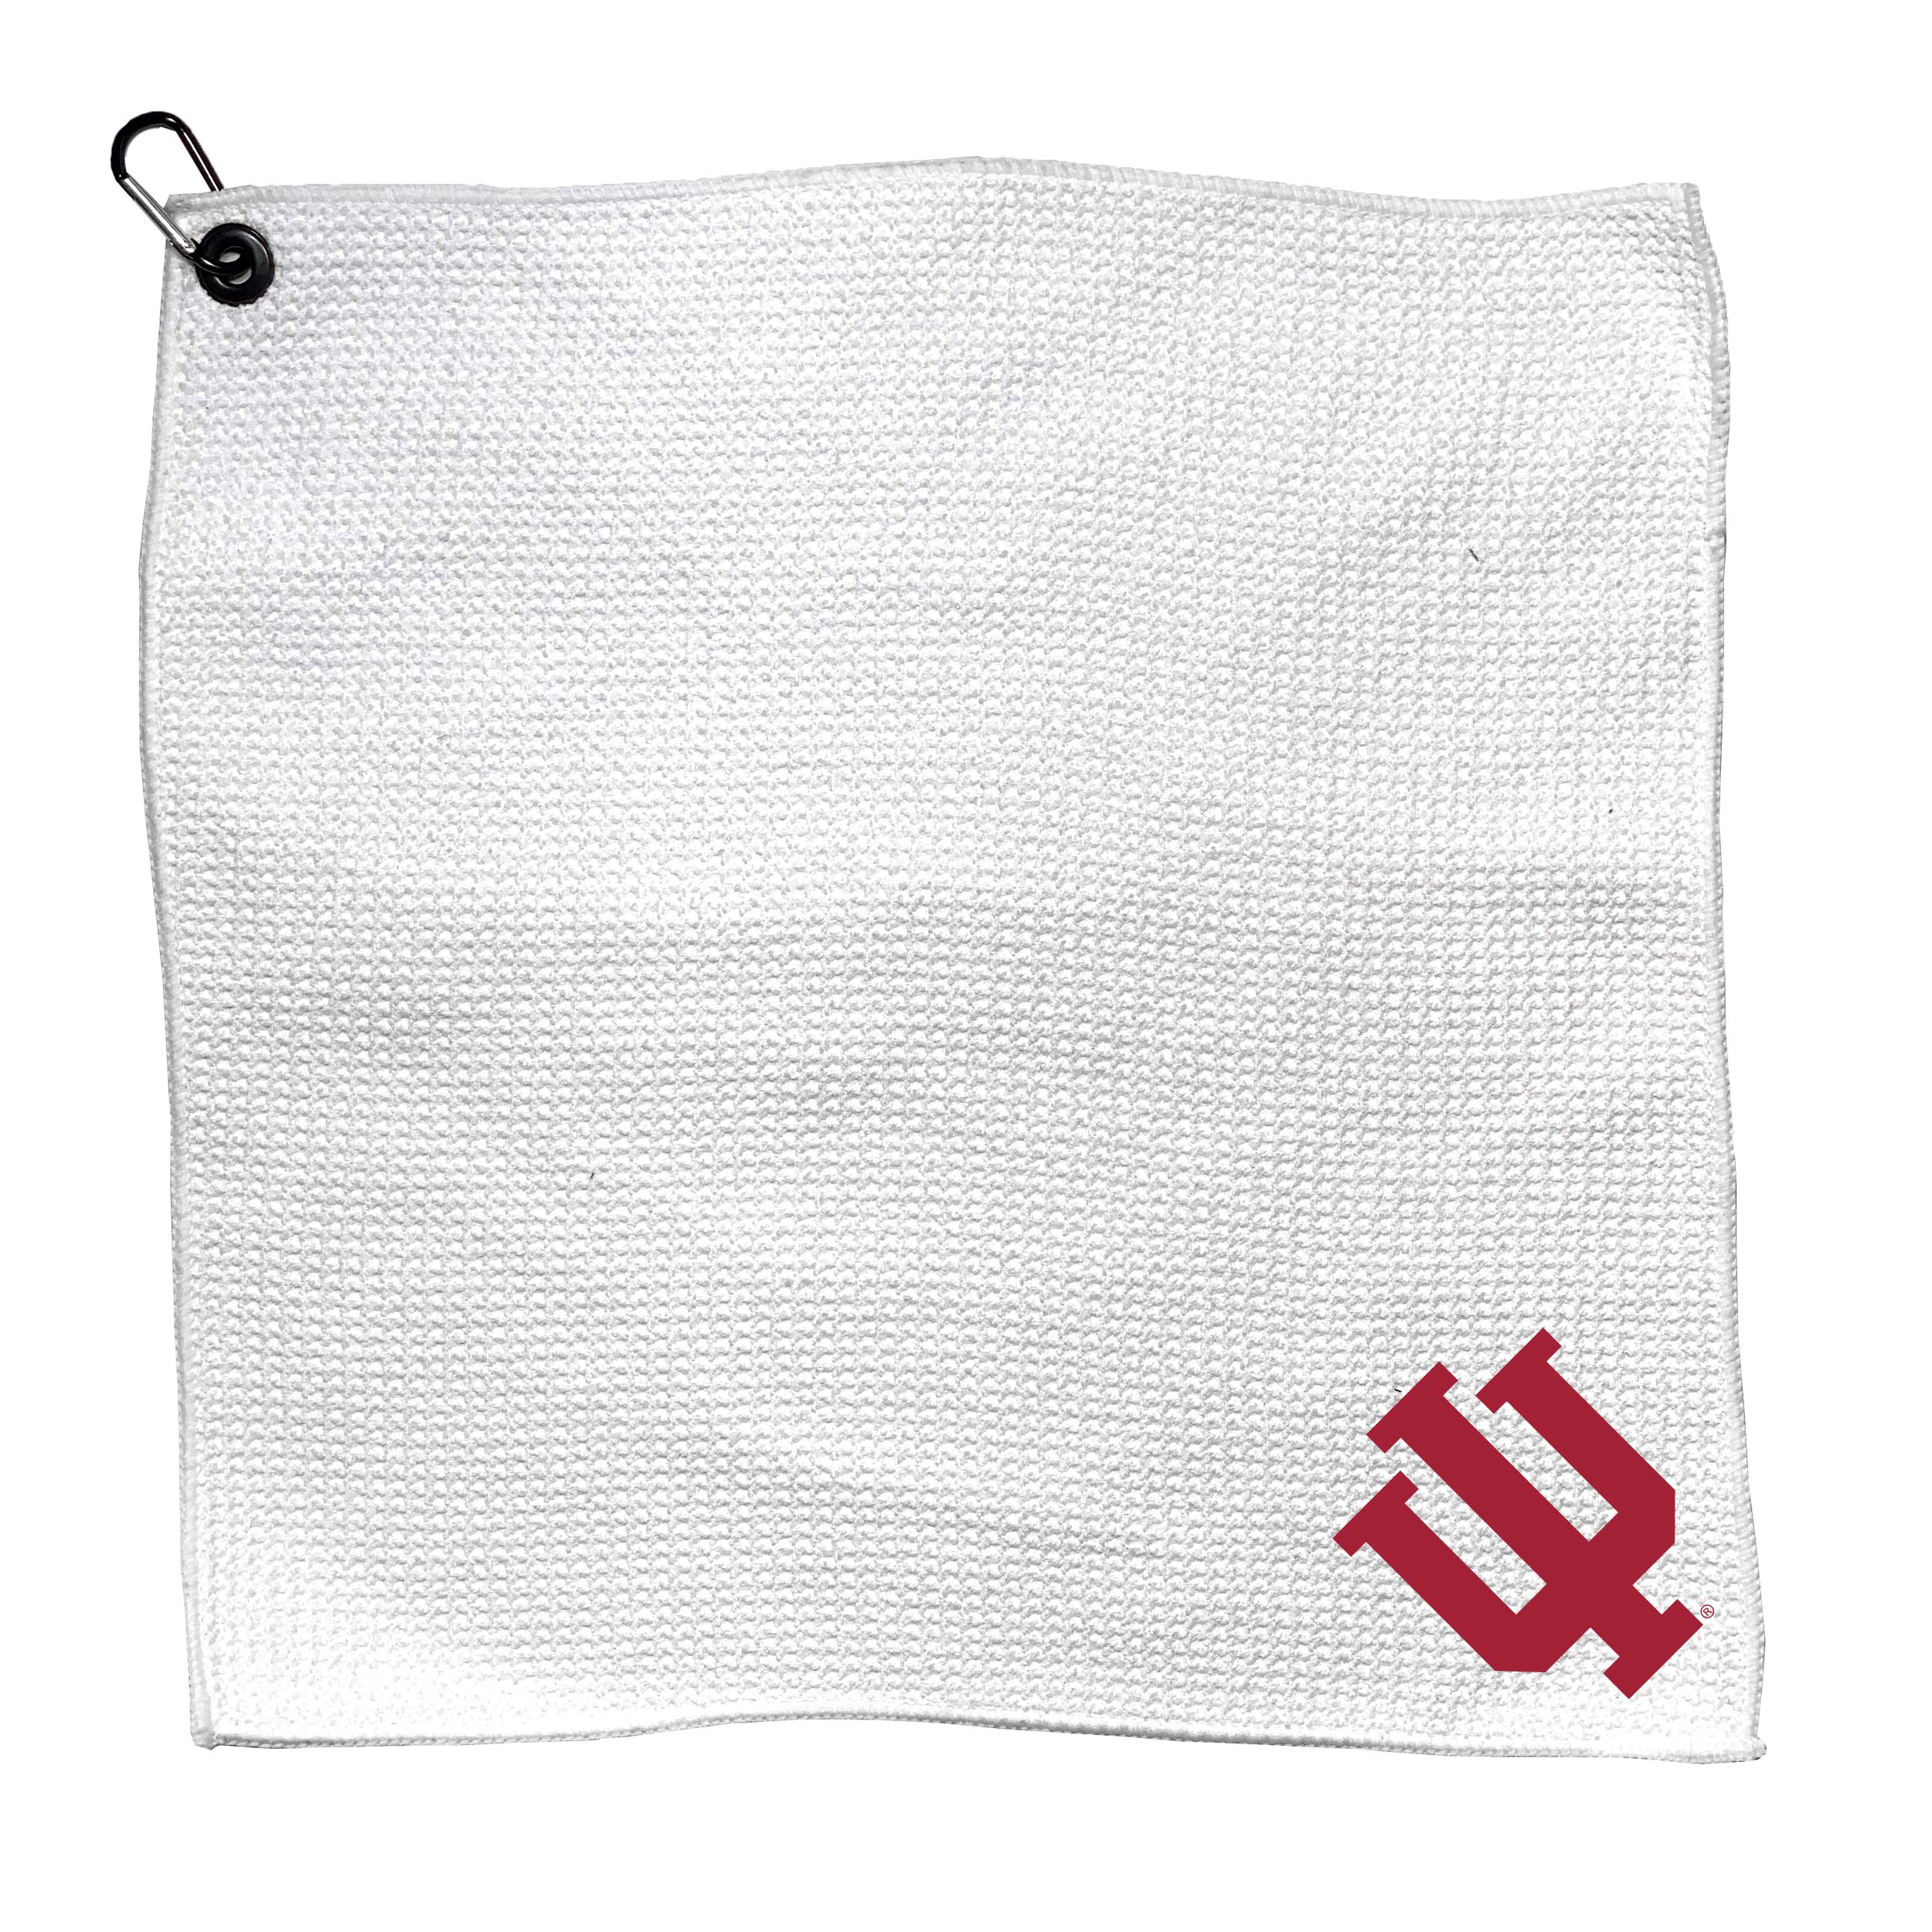 Team Golf Ncaa Indiana Hoosiers Golf Towel With Carabiner Clip, Premium Microfiber With Deep Waffle Pockets, Superior Water Abso